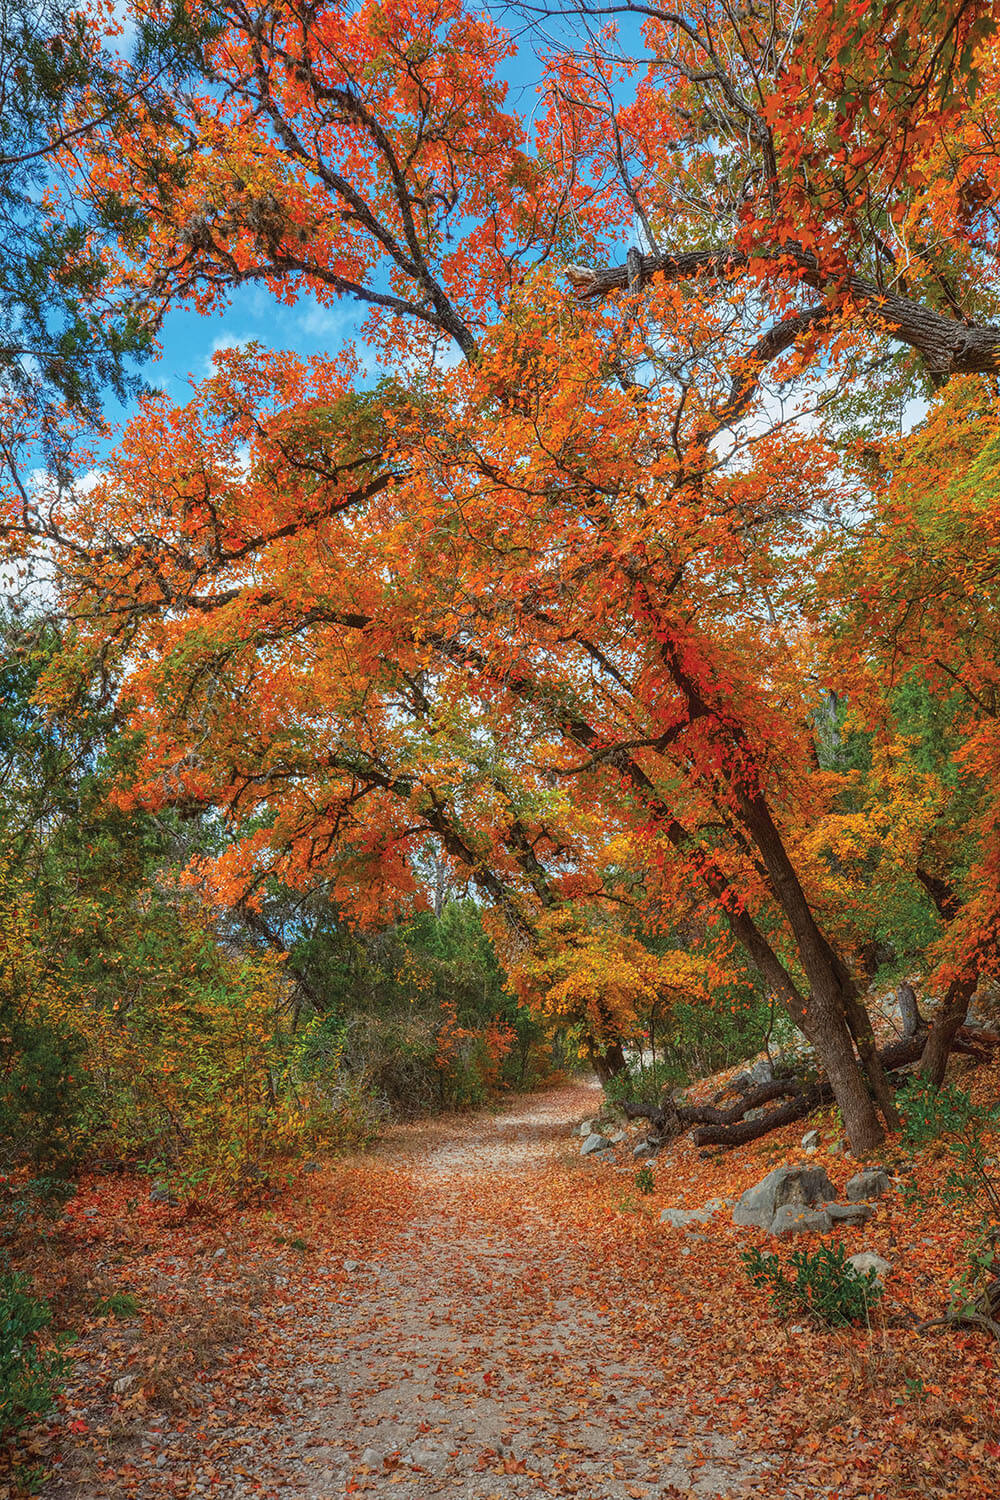 Bright orange fall-colored trees line a gravel walkway under blue sky